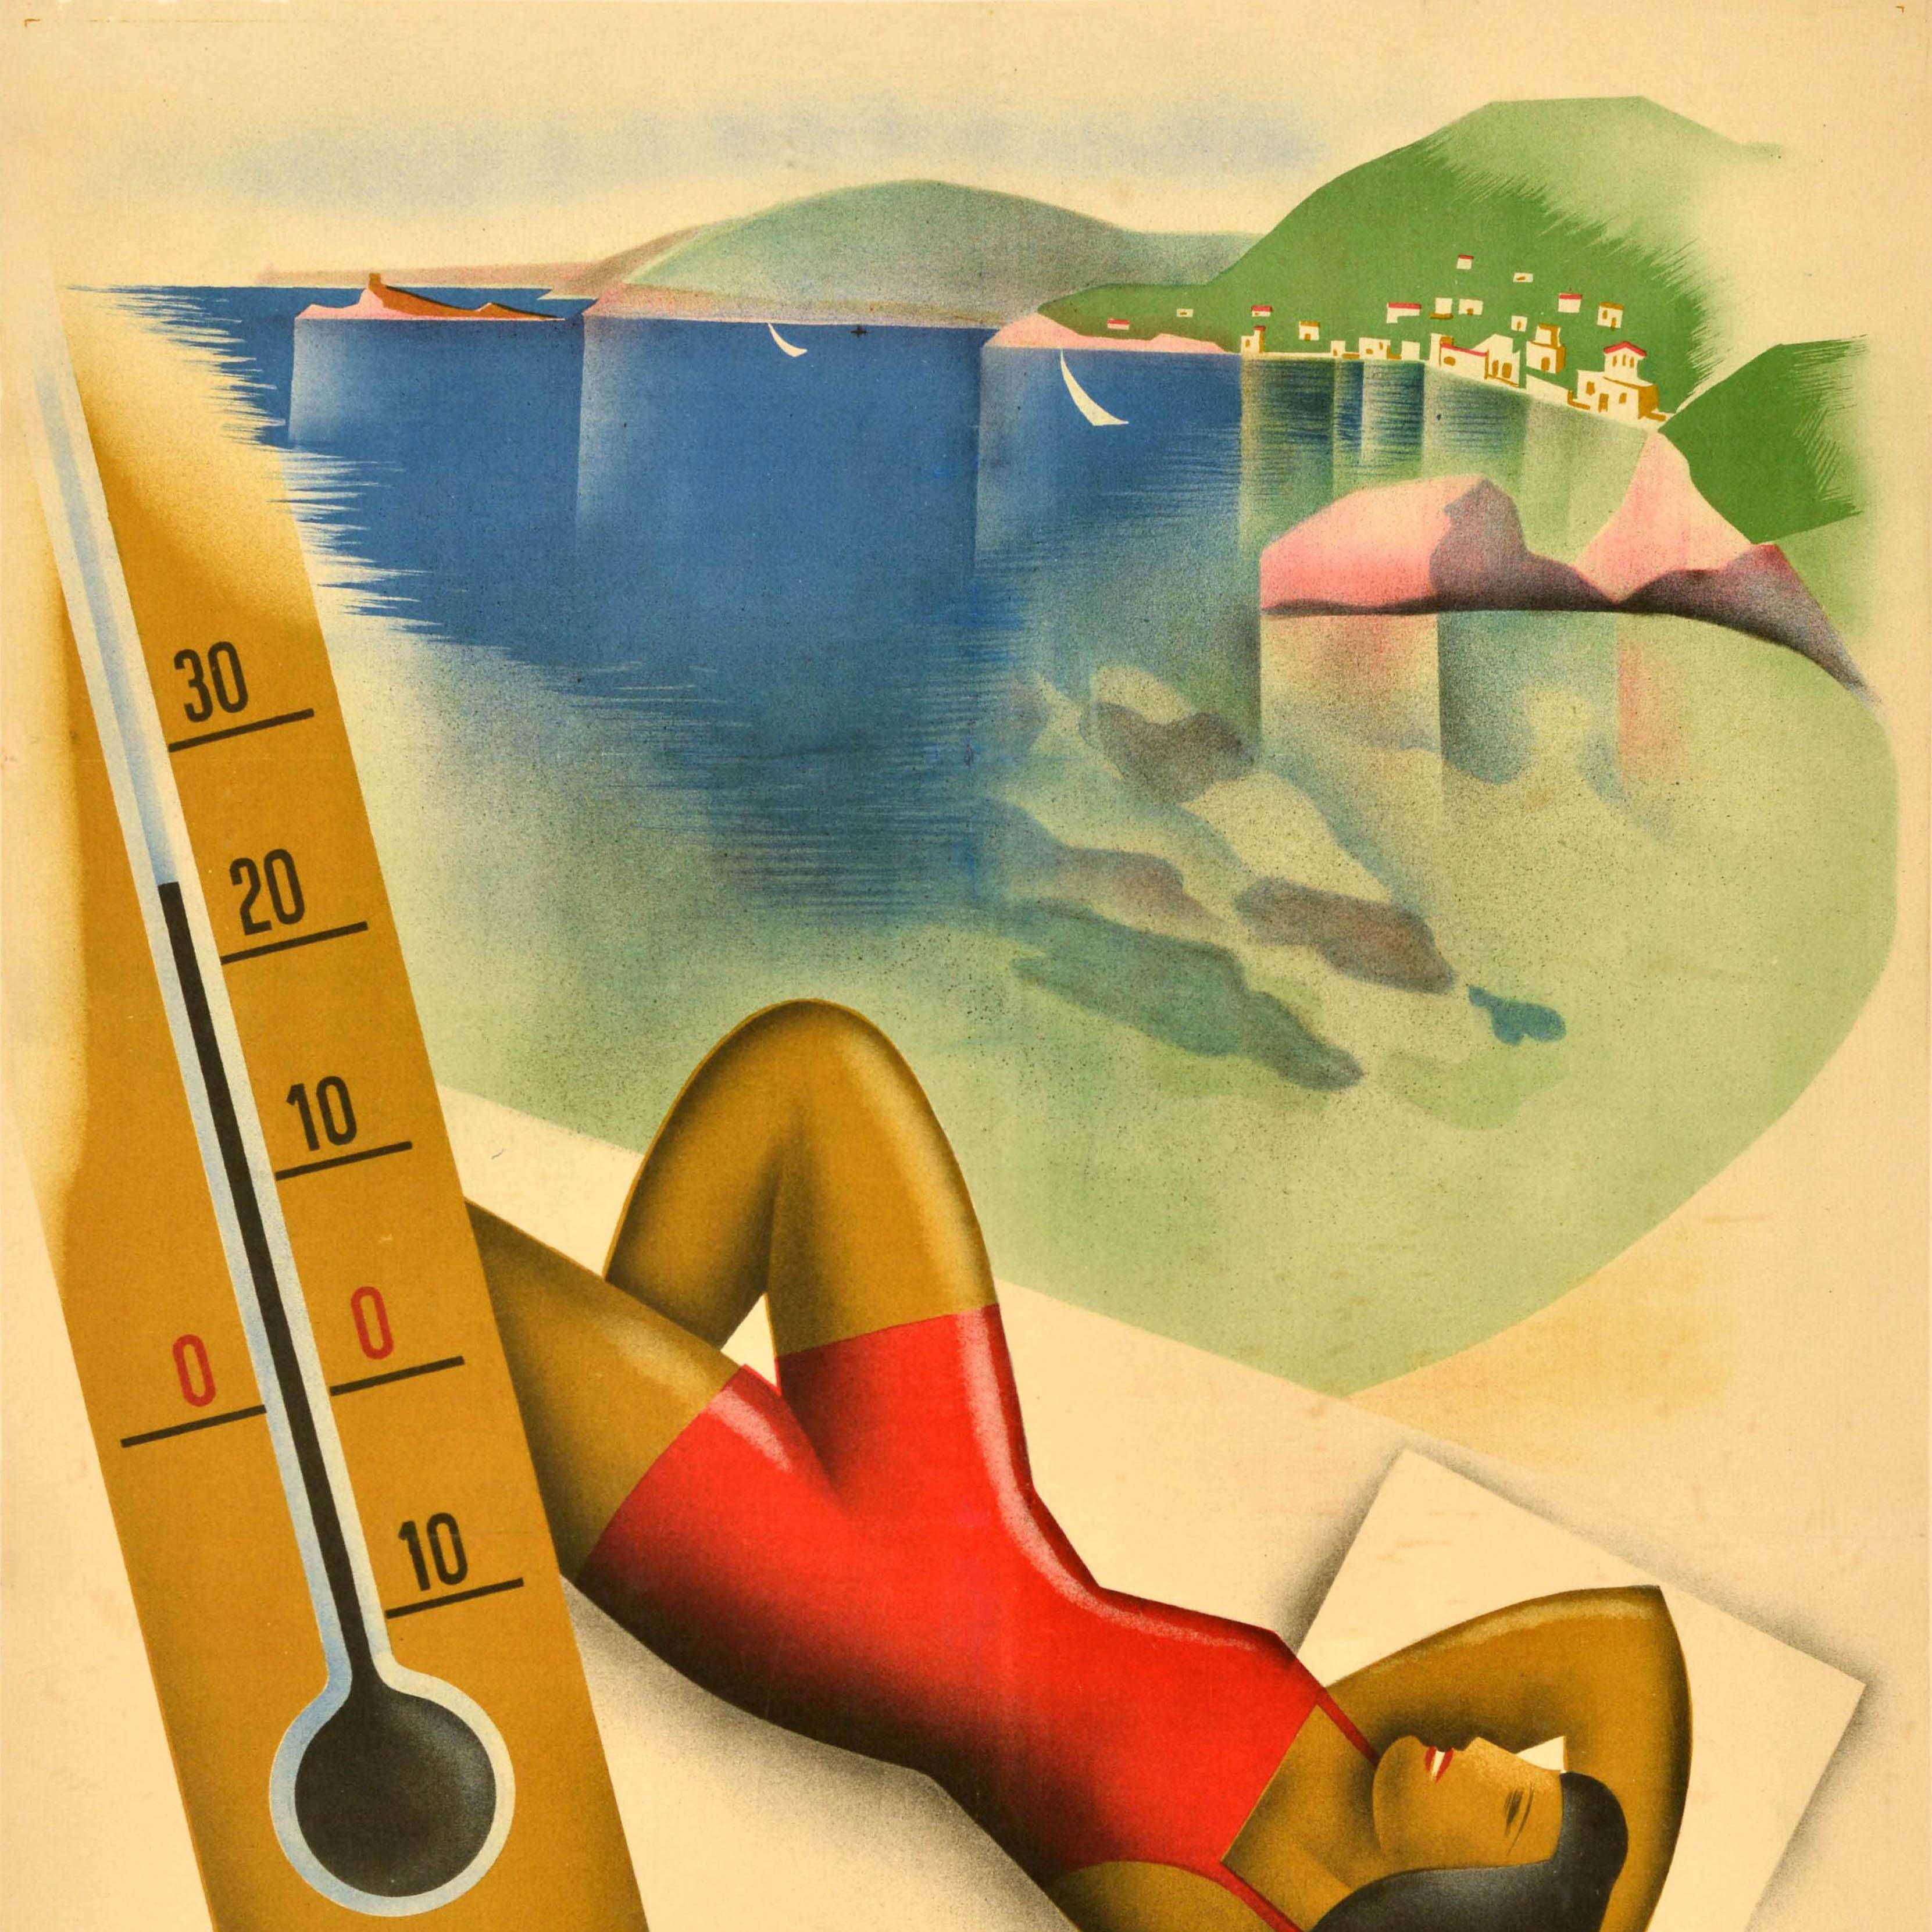 Original vintage travel advertising poster - Winter in Majorca Spain - featuring an Art Deco illustration of a lady in a red swimsuit sunbathing with a thermometer showing a warm temperature of over 20'C in the foreground, a scenic view of sailing